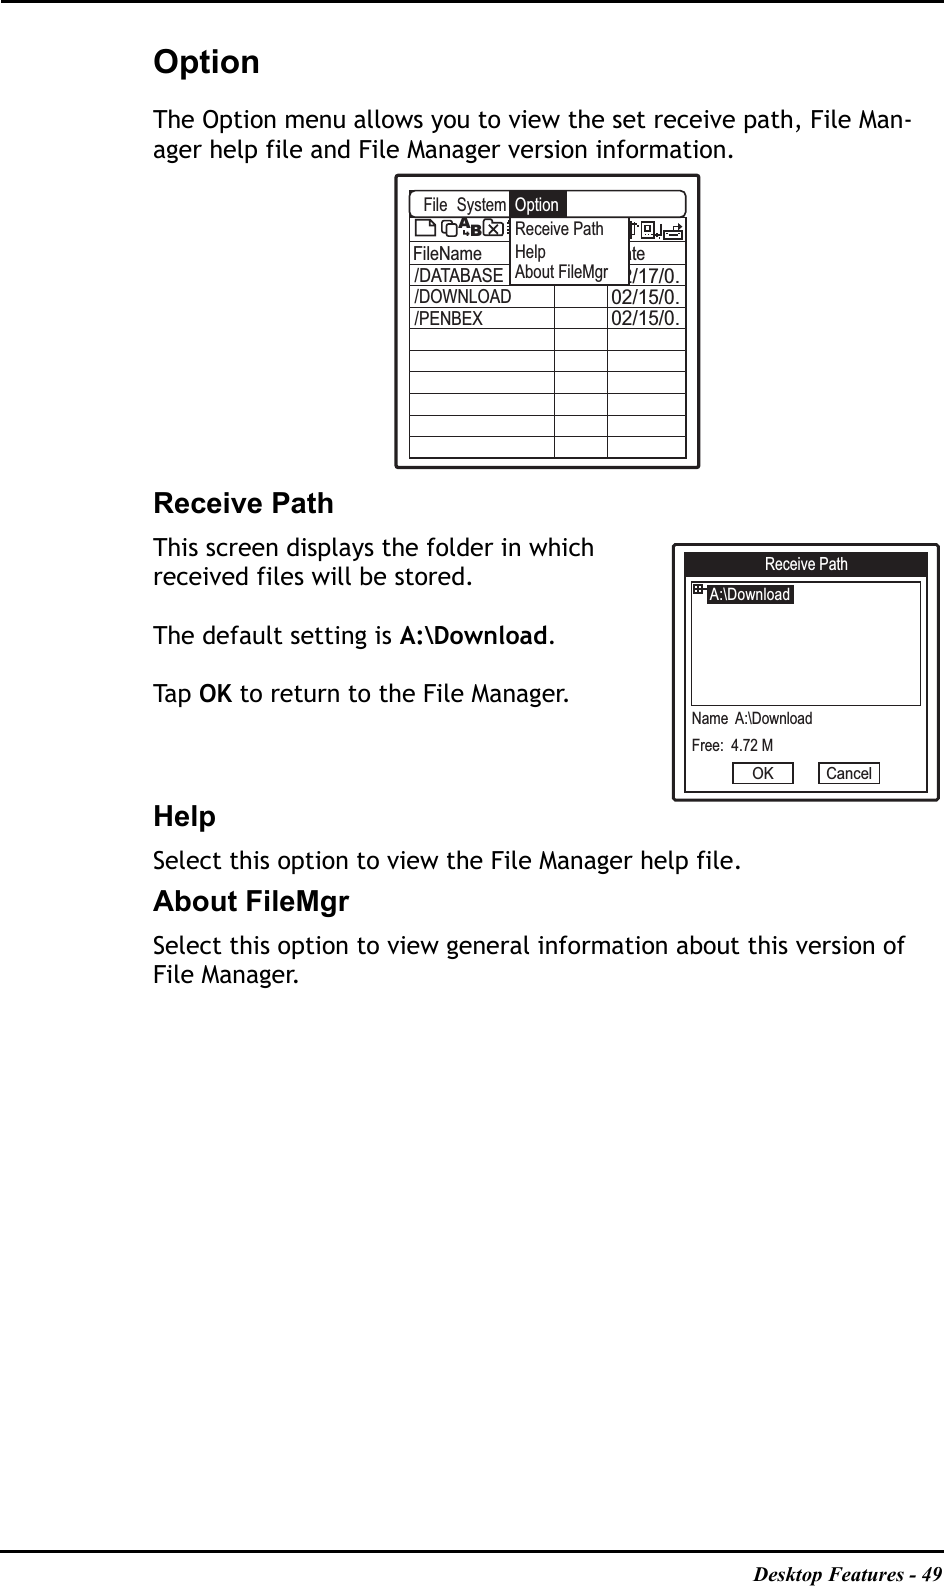 Desktop Features - 49OptionThe Option menu allows you to view the set receive path, File Man-ager help file and File Manager version information.Receive PathThis screen displays the folder in which received files will be stored.The default setting is A:\Download.Ta p   OK to return to the File Manager.HelpSelect this option to view the File Manager help file.About FileMgrSelect this option to view general information about this version of File Manager.A:\FileName Size Date02/17/0.02/15/0.02/15/0./DATABASE/DOWNLOAD/PENBEXABFileReceive PathHelpAbout FileMgrSystem OptionReceive Path A:\DownloadName  A:\DownloadFree:  4.72 MOK Cancel